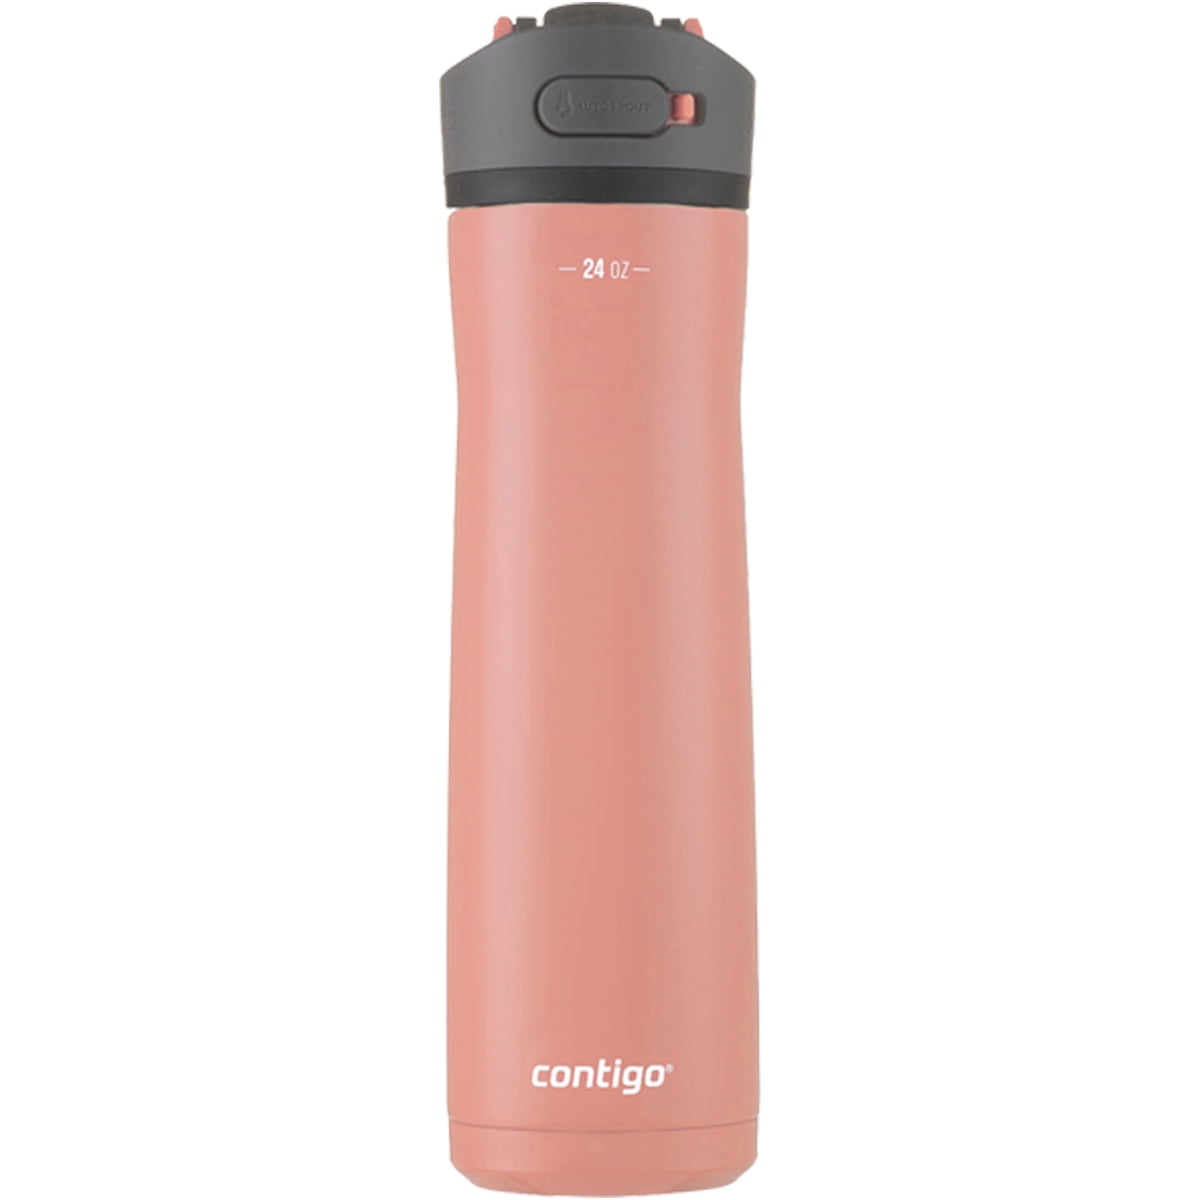 Contigo Ashland Chill 2.0 Water Bottle with AUTOSPOUT Lid 2-Pack 24 oz. Blue Corn and Stainless Steel with Licorice Lid Stainless Steel Water Bottle 